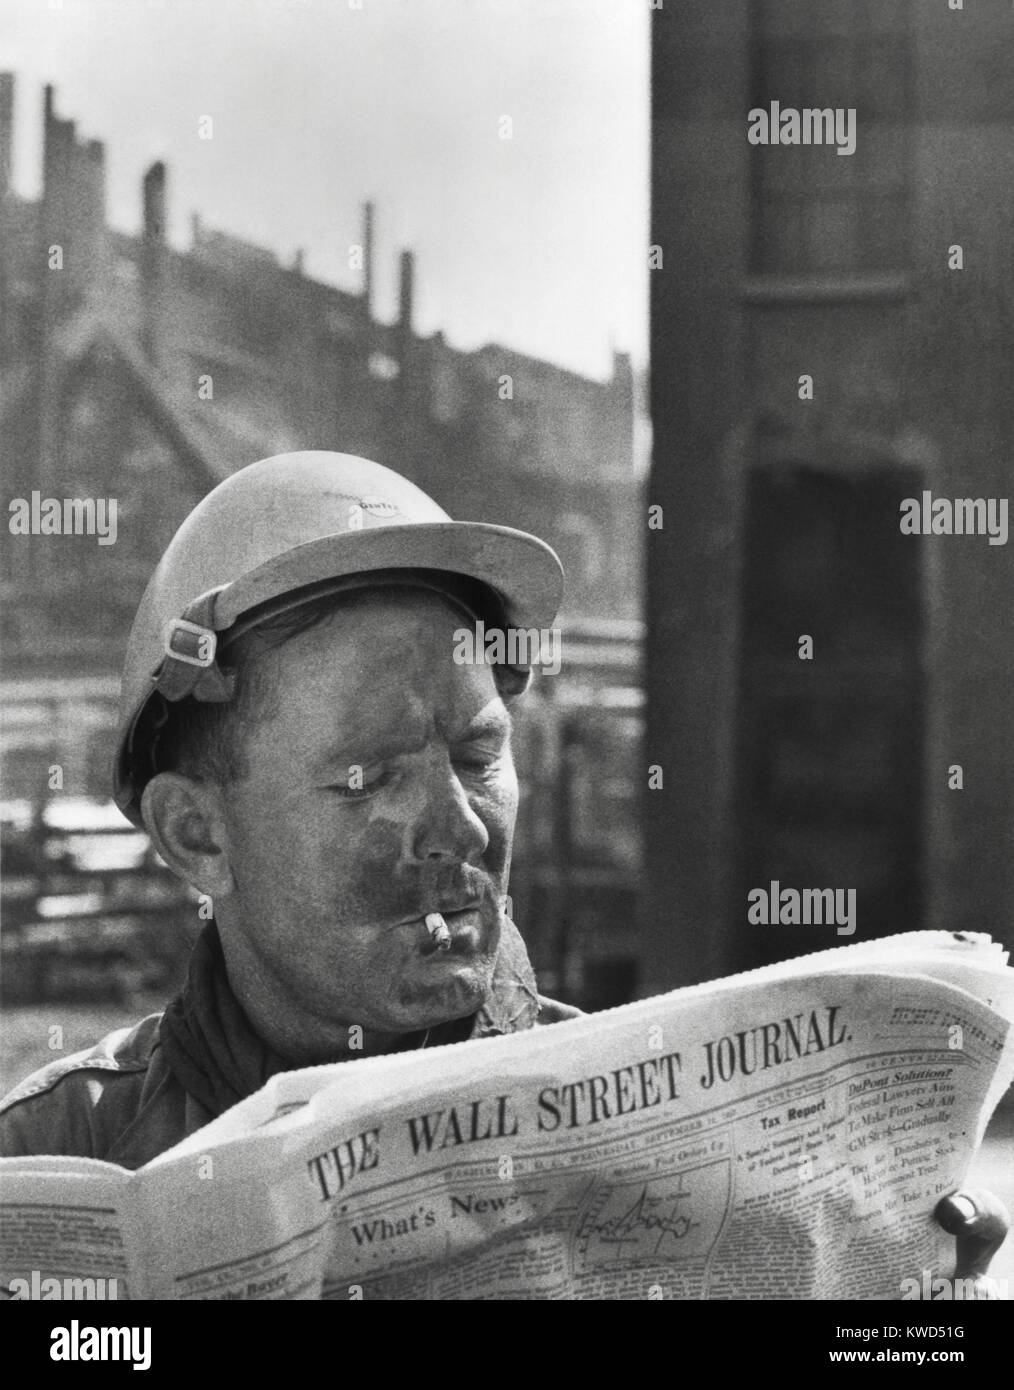 An electrician reads 'The Wall Street Journal' to check his stock market investments. Employed by Monsanto, he invests in the company through the corporation's 'Stock Purchase Plan' for its workers. Ca. 1958. (BSLOC 2014 13 231) Stock Photo